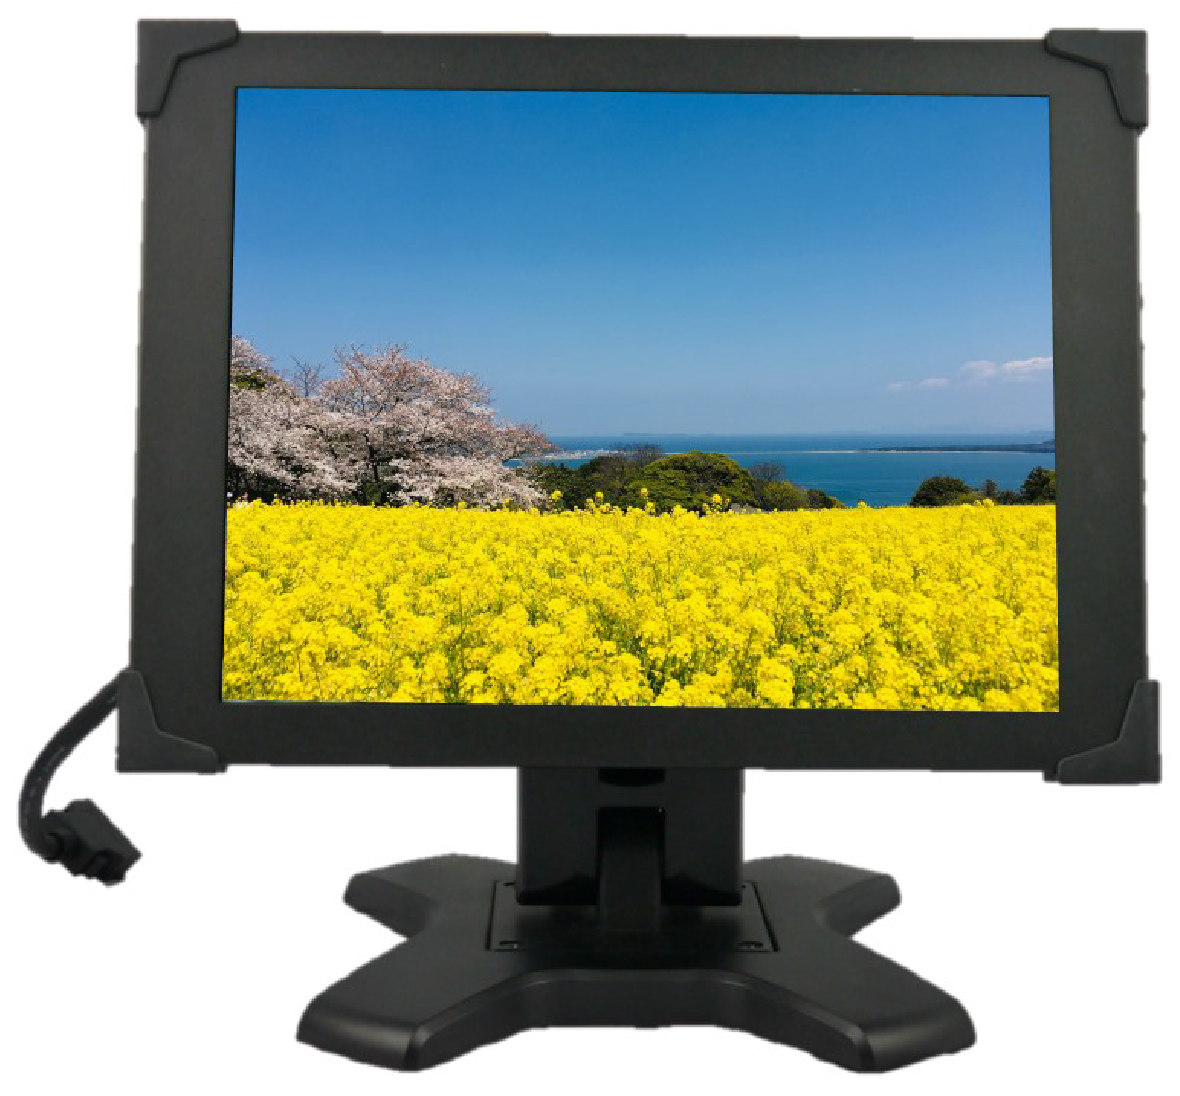 SEF121TPC-LXH-PCT-FI is an industrial ultra-bright touch monitor which can be used to any kinds of vehicles.